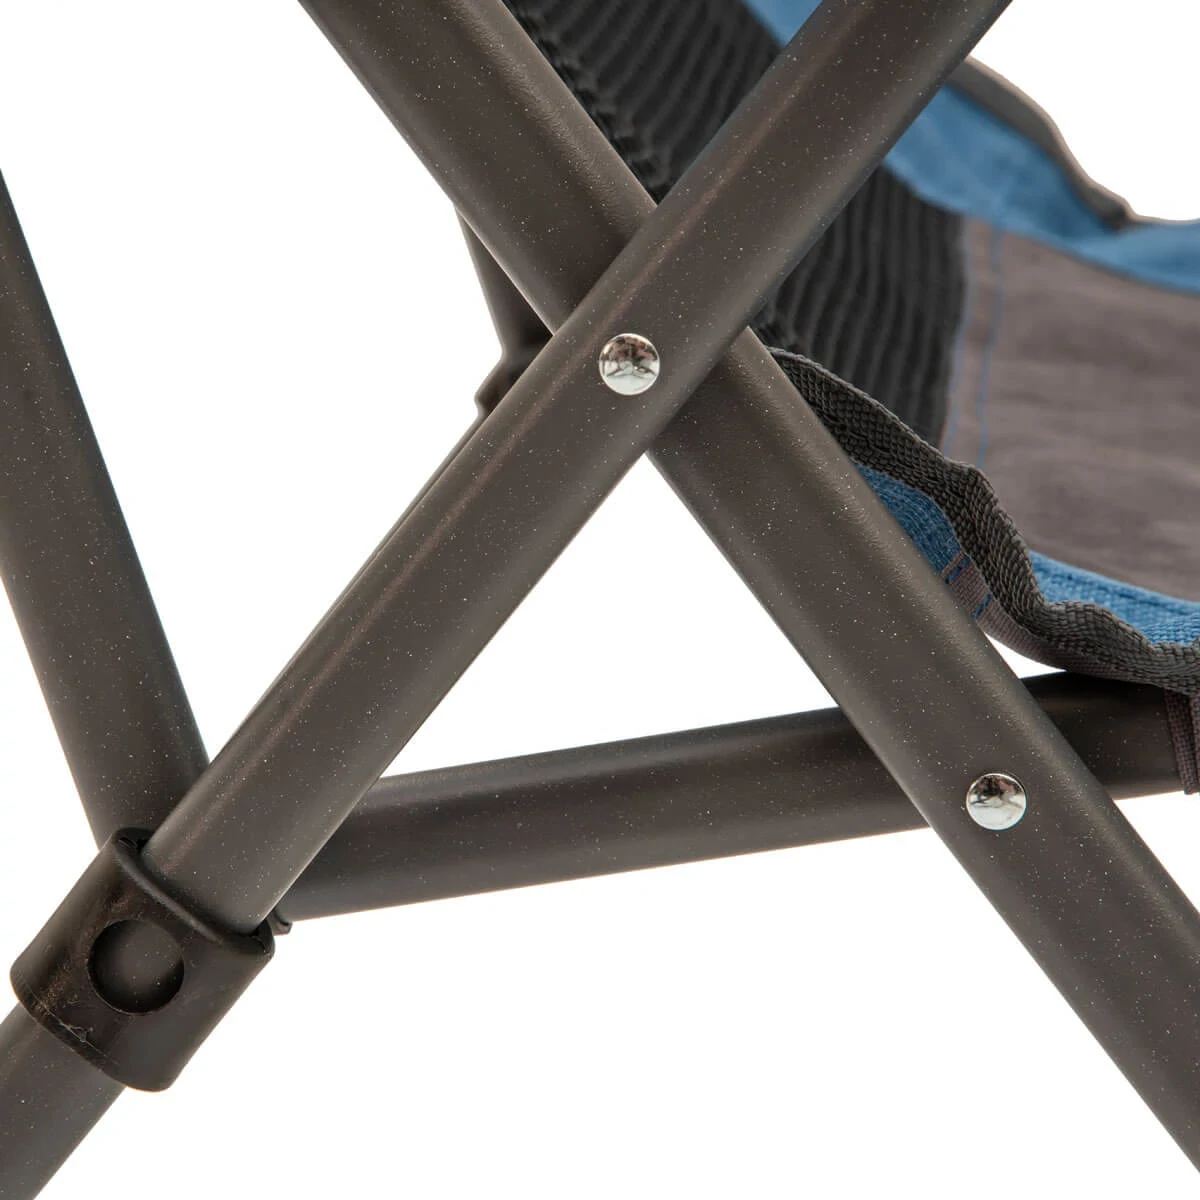 Close up image of Camp Chair frame